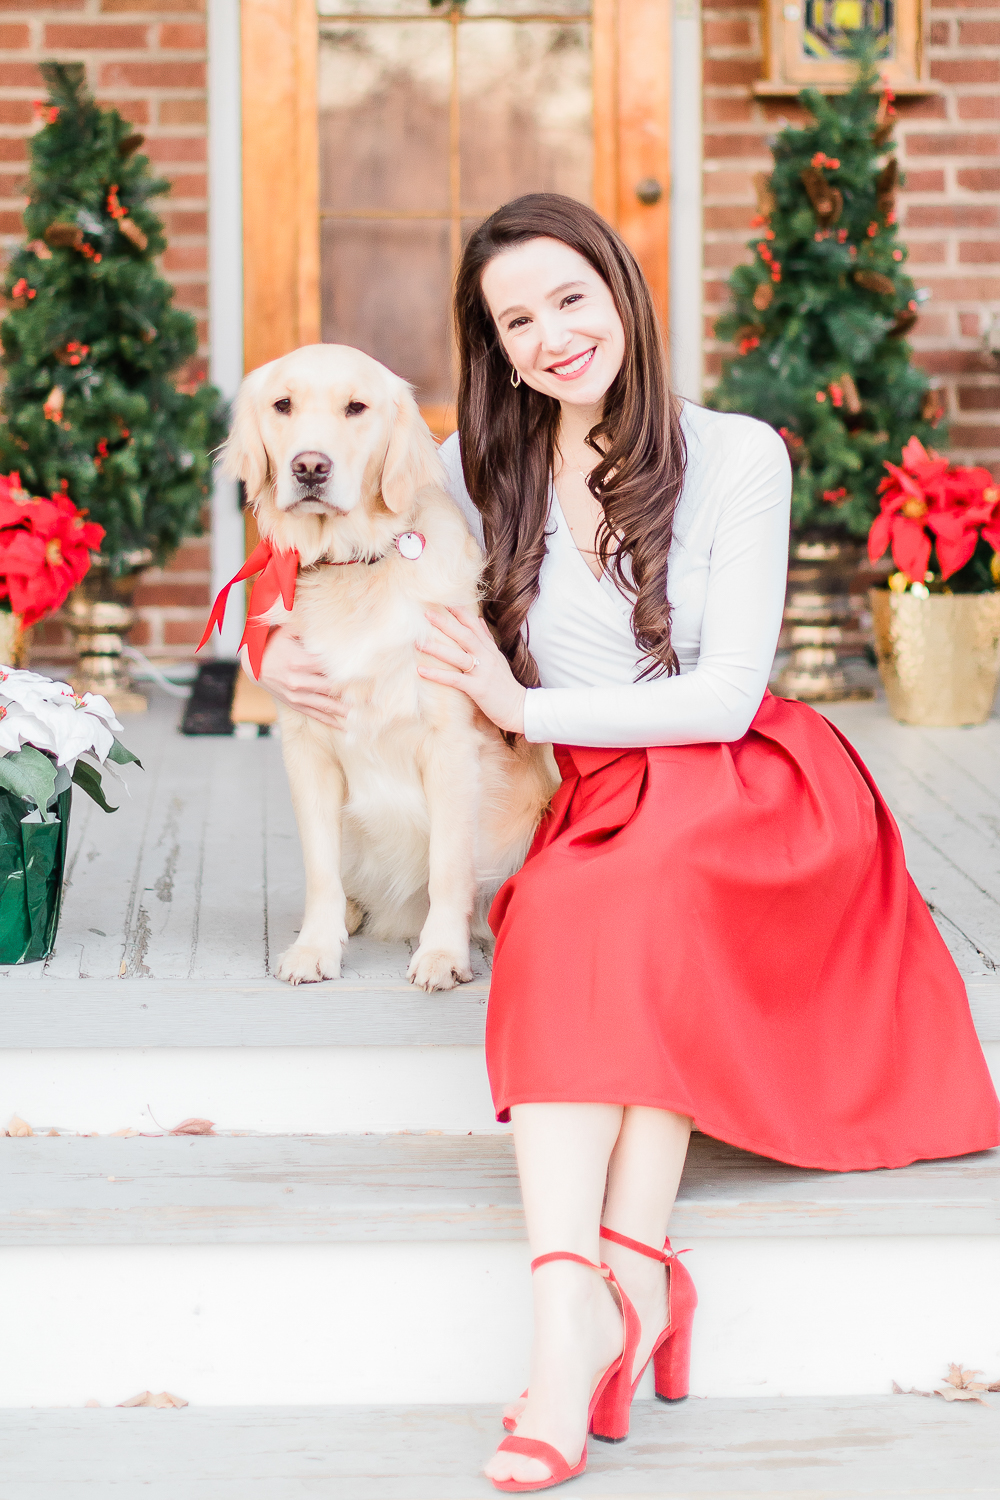 Kate Spade Inspired Holiday Outfit, Amazon red bow skirt, golden retriever with red bow, preppy holiday outfit idea, popular affordable fashion blogger Stephanie Ziajka, popular affordable fashion blog Diary of a Debutante